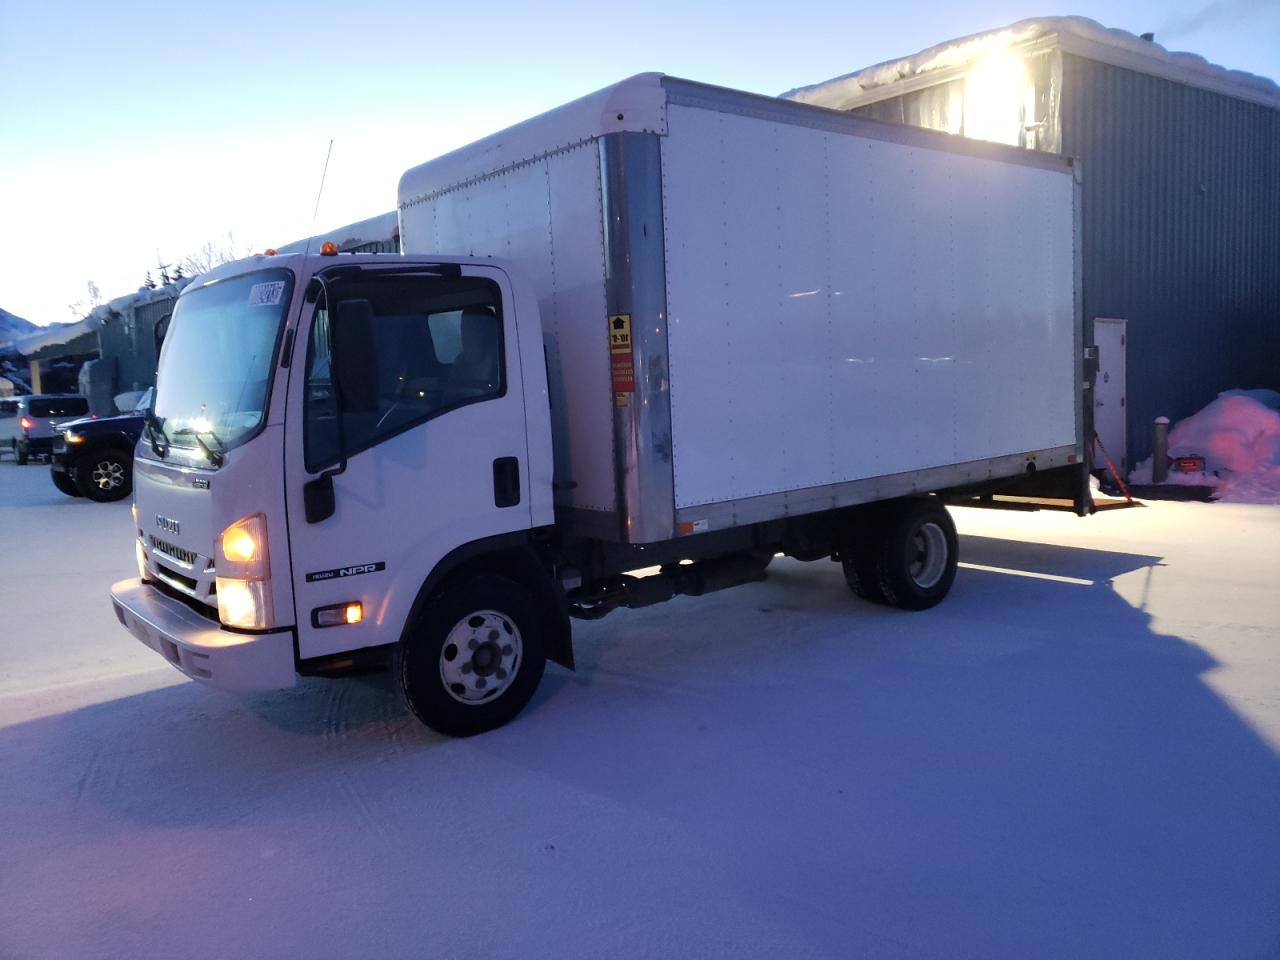 vin: 54DB4W1B6GS800618 54DB4W1B6GS800618 2016 isuzu npr 6000 for Sale in 99507, Ak - Anchorage South, Anchorage, USA